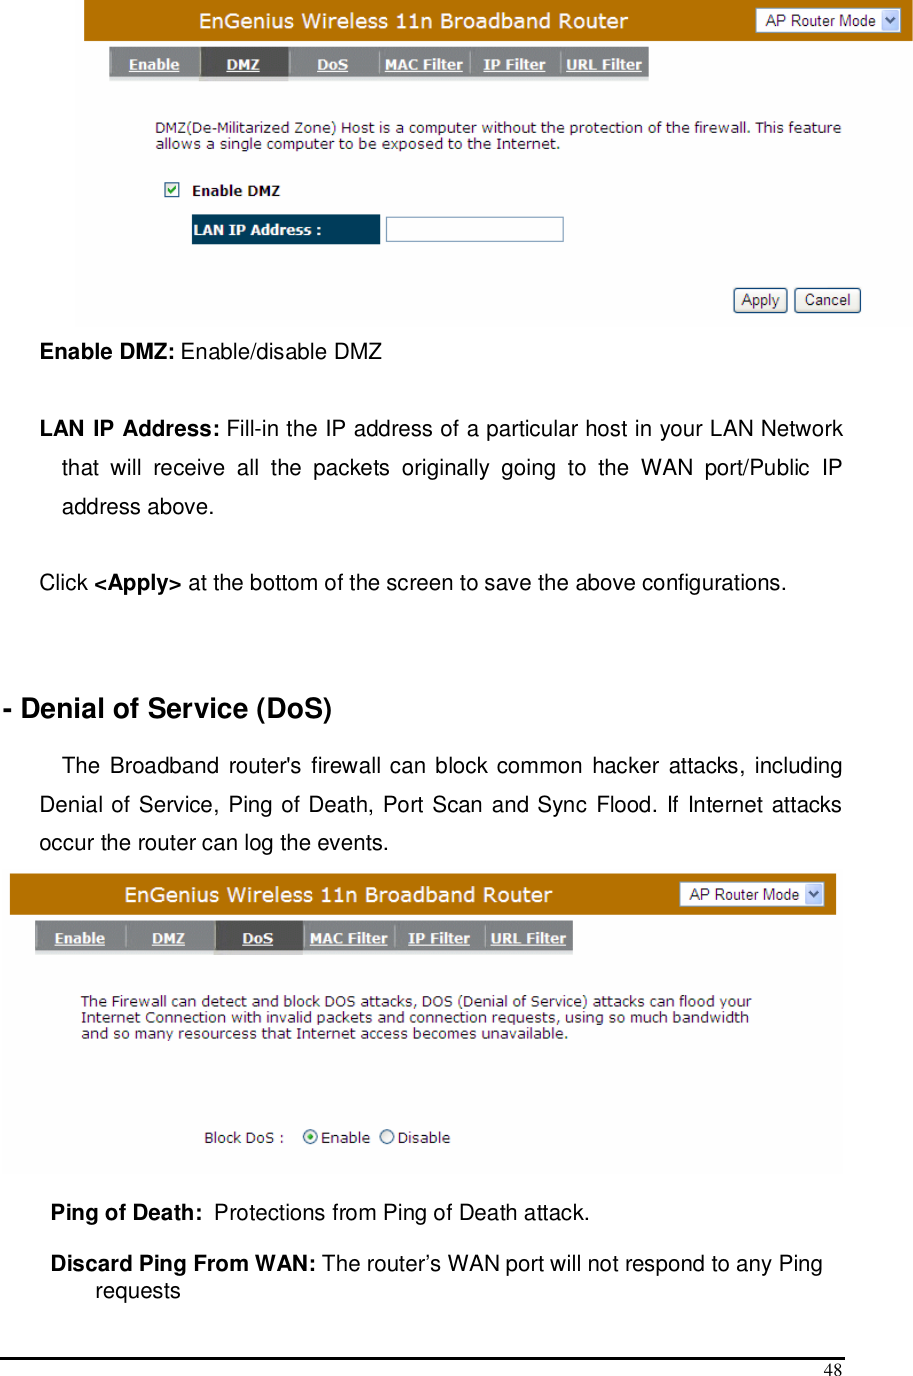  48  Enable DMZ: Enable/disable DMZ  LAN IP Address: Fill-in the IP address of a particular host in your LAN Network that  will  receive  all  the  packets  originally  going  to  the  WAN  port/Public  IP address above.  Click &lt;Apply&gt; at the bottom of the screen to save the above configurations.     - Denial of Service (DoS)  The Broadband  router&apos;s firewall  can block common hacker  attacks,  including Denial of Service, Ping of Death, Port Scan and Sync Flood. If Internet attacks occur the router can log the events.   Ping of Death:  Protections from Ping of Death attack.   Discard Ping From WAN: The router’s WAN port will not respond to any Ping requests 